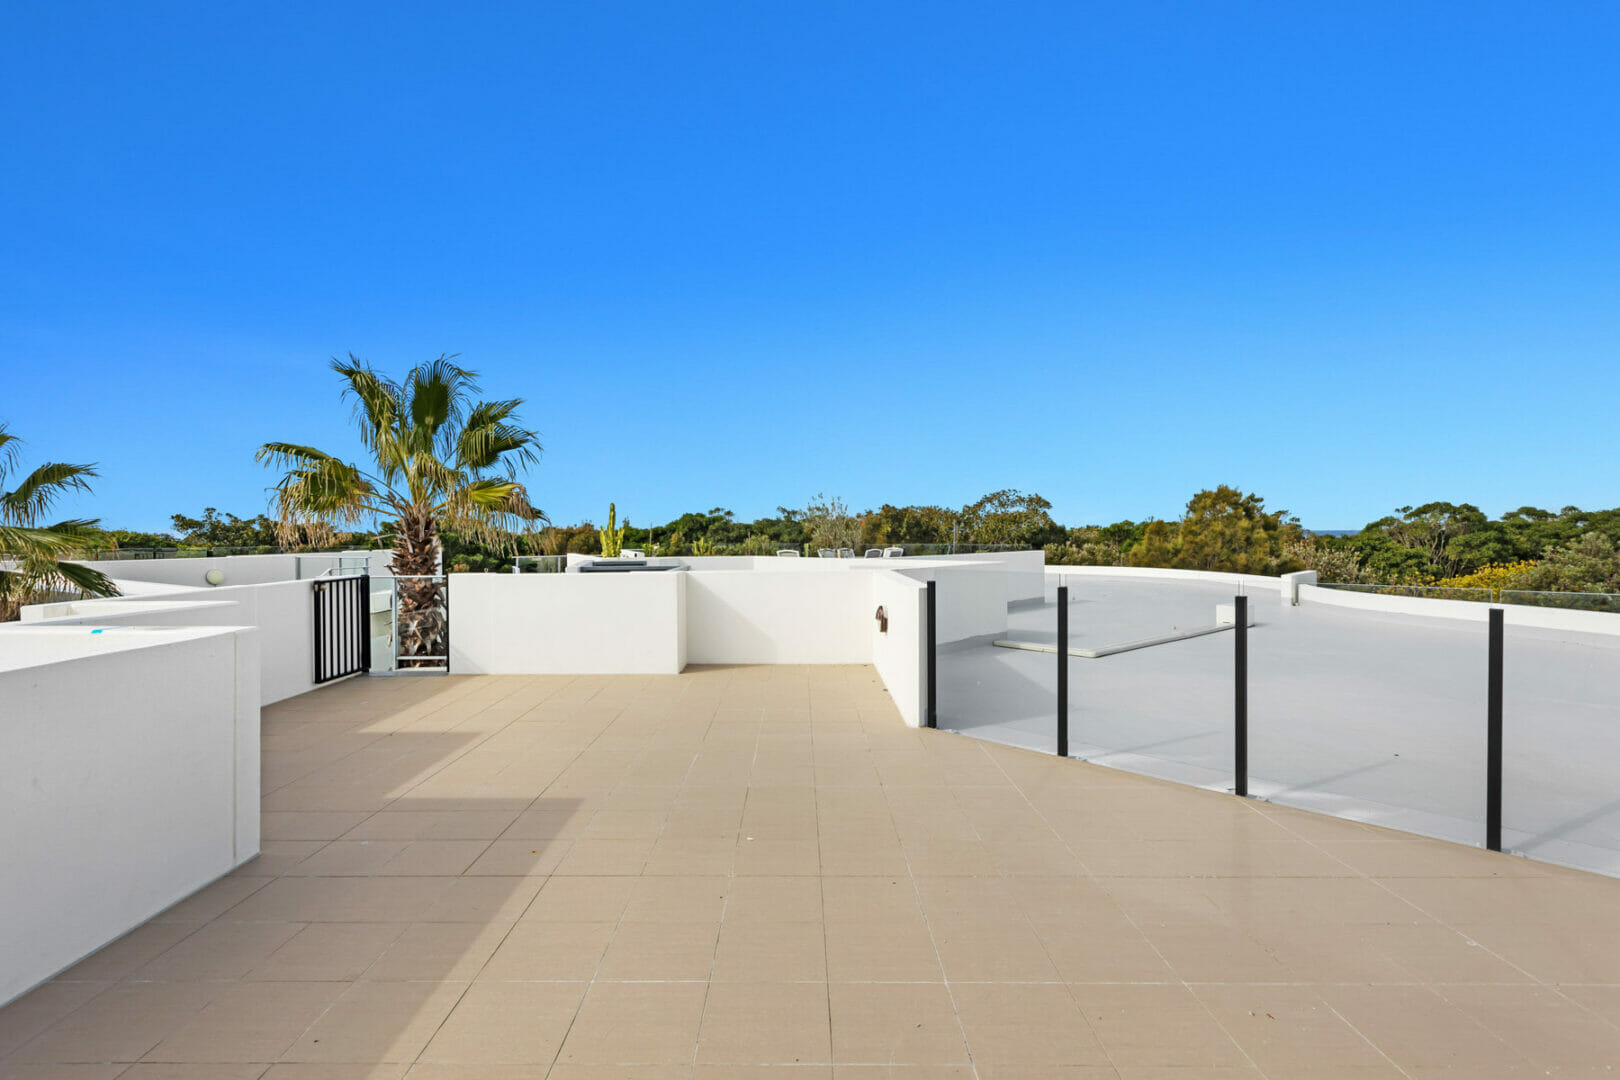 Large open rooftop deck